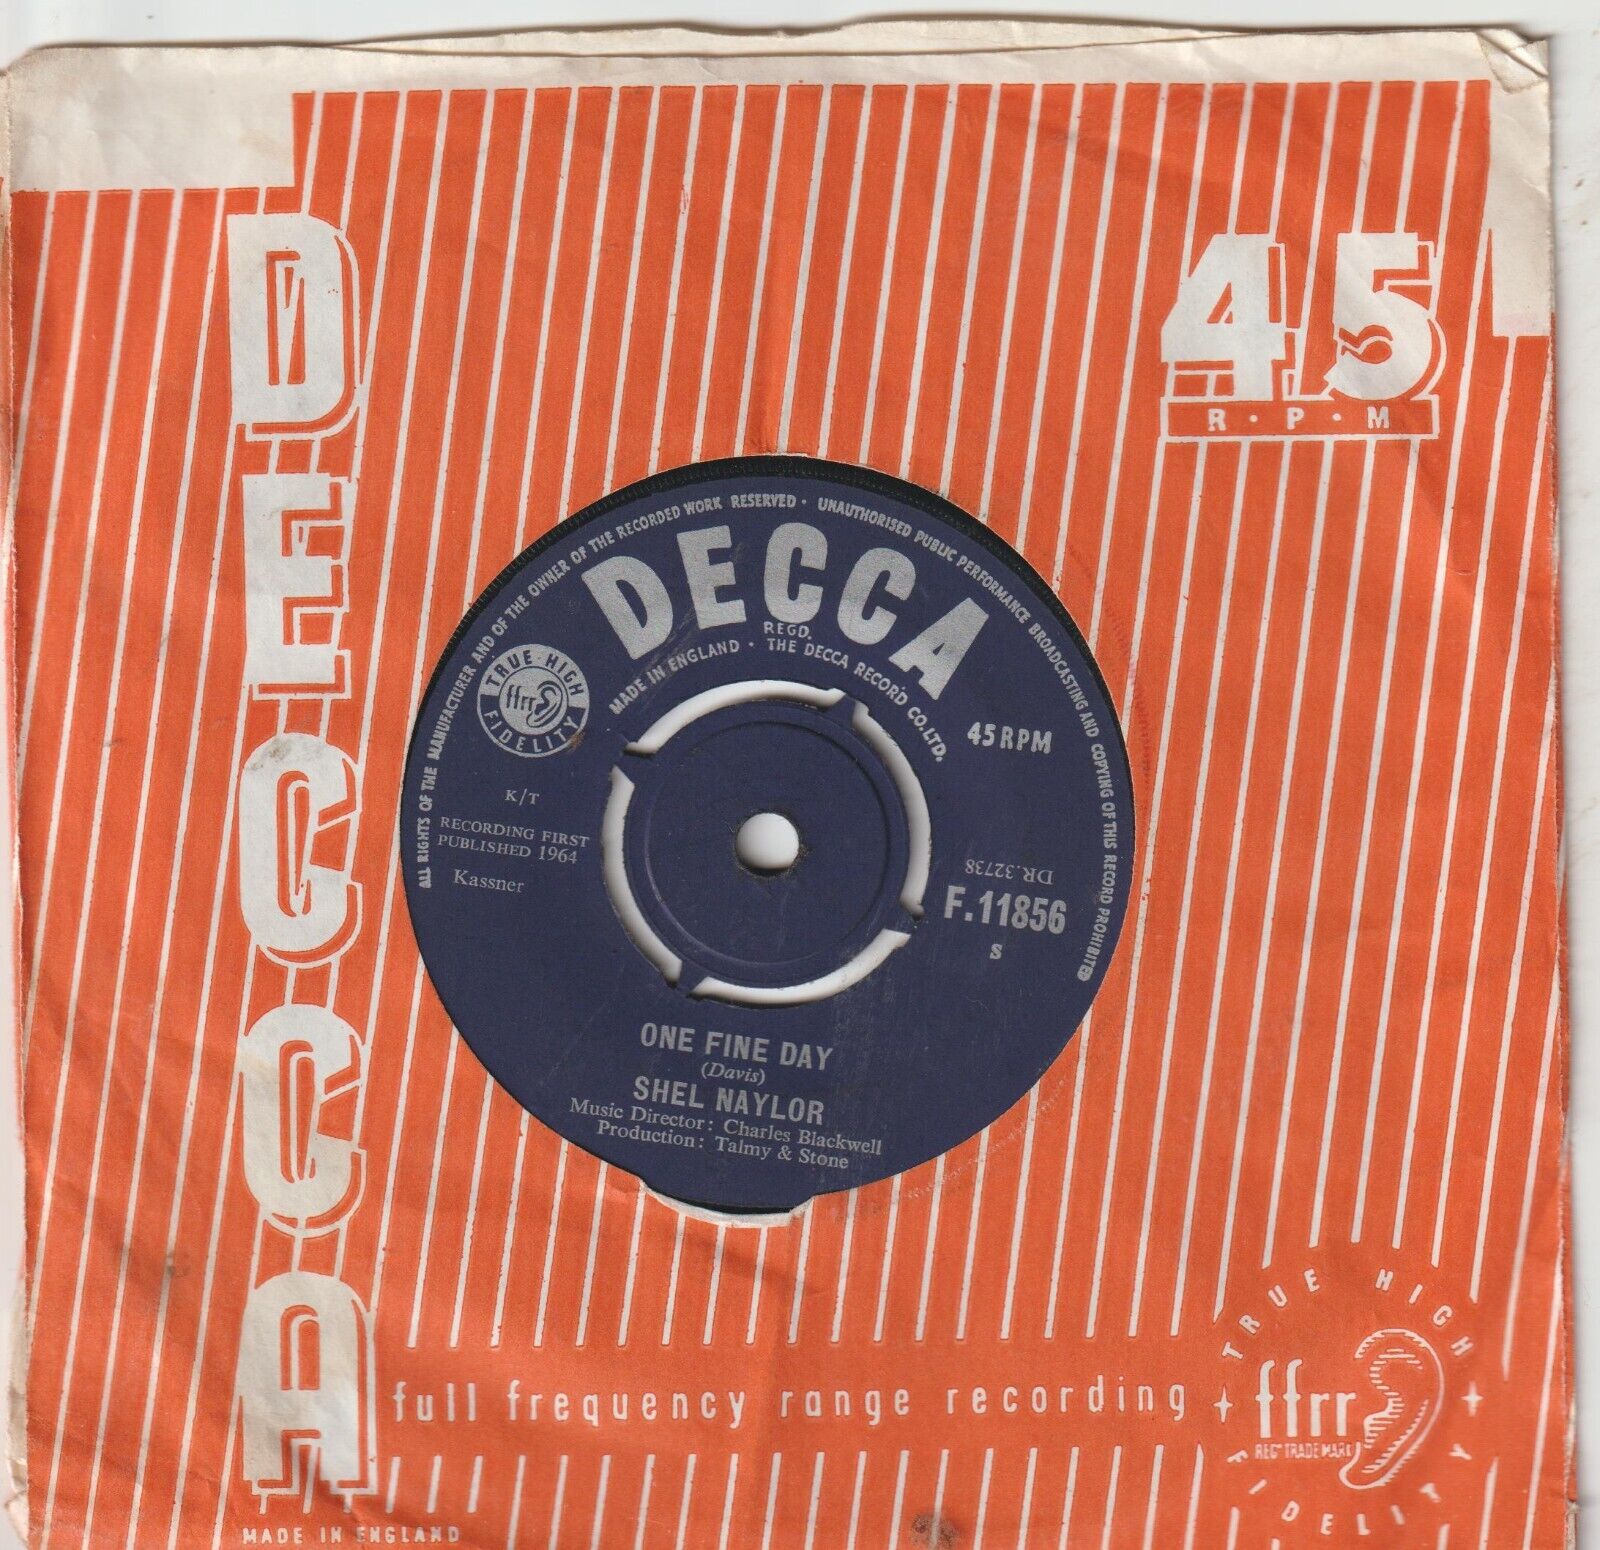 Shel Naylor One fine day Decca F.11856 VG Plays well